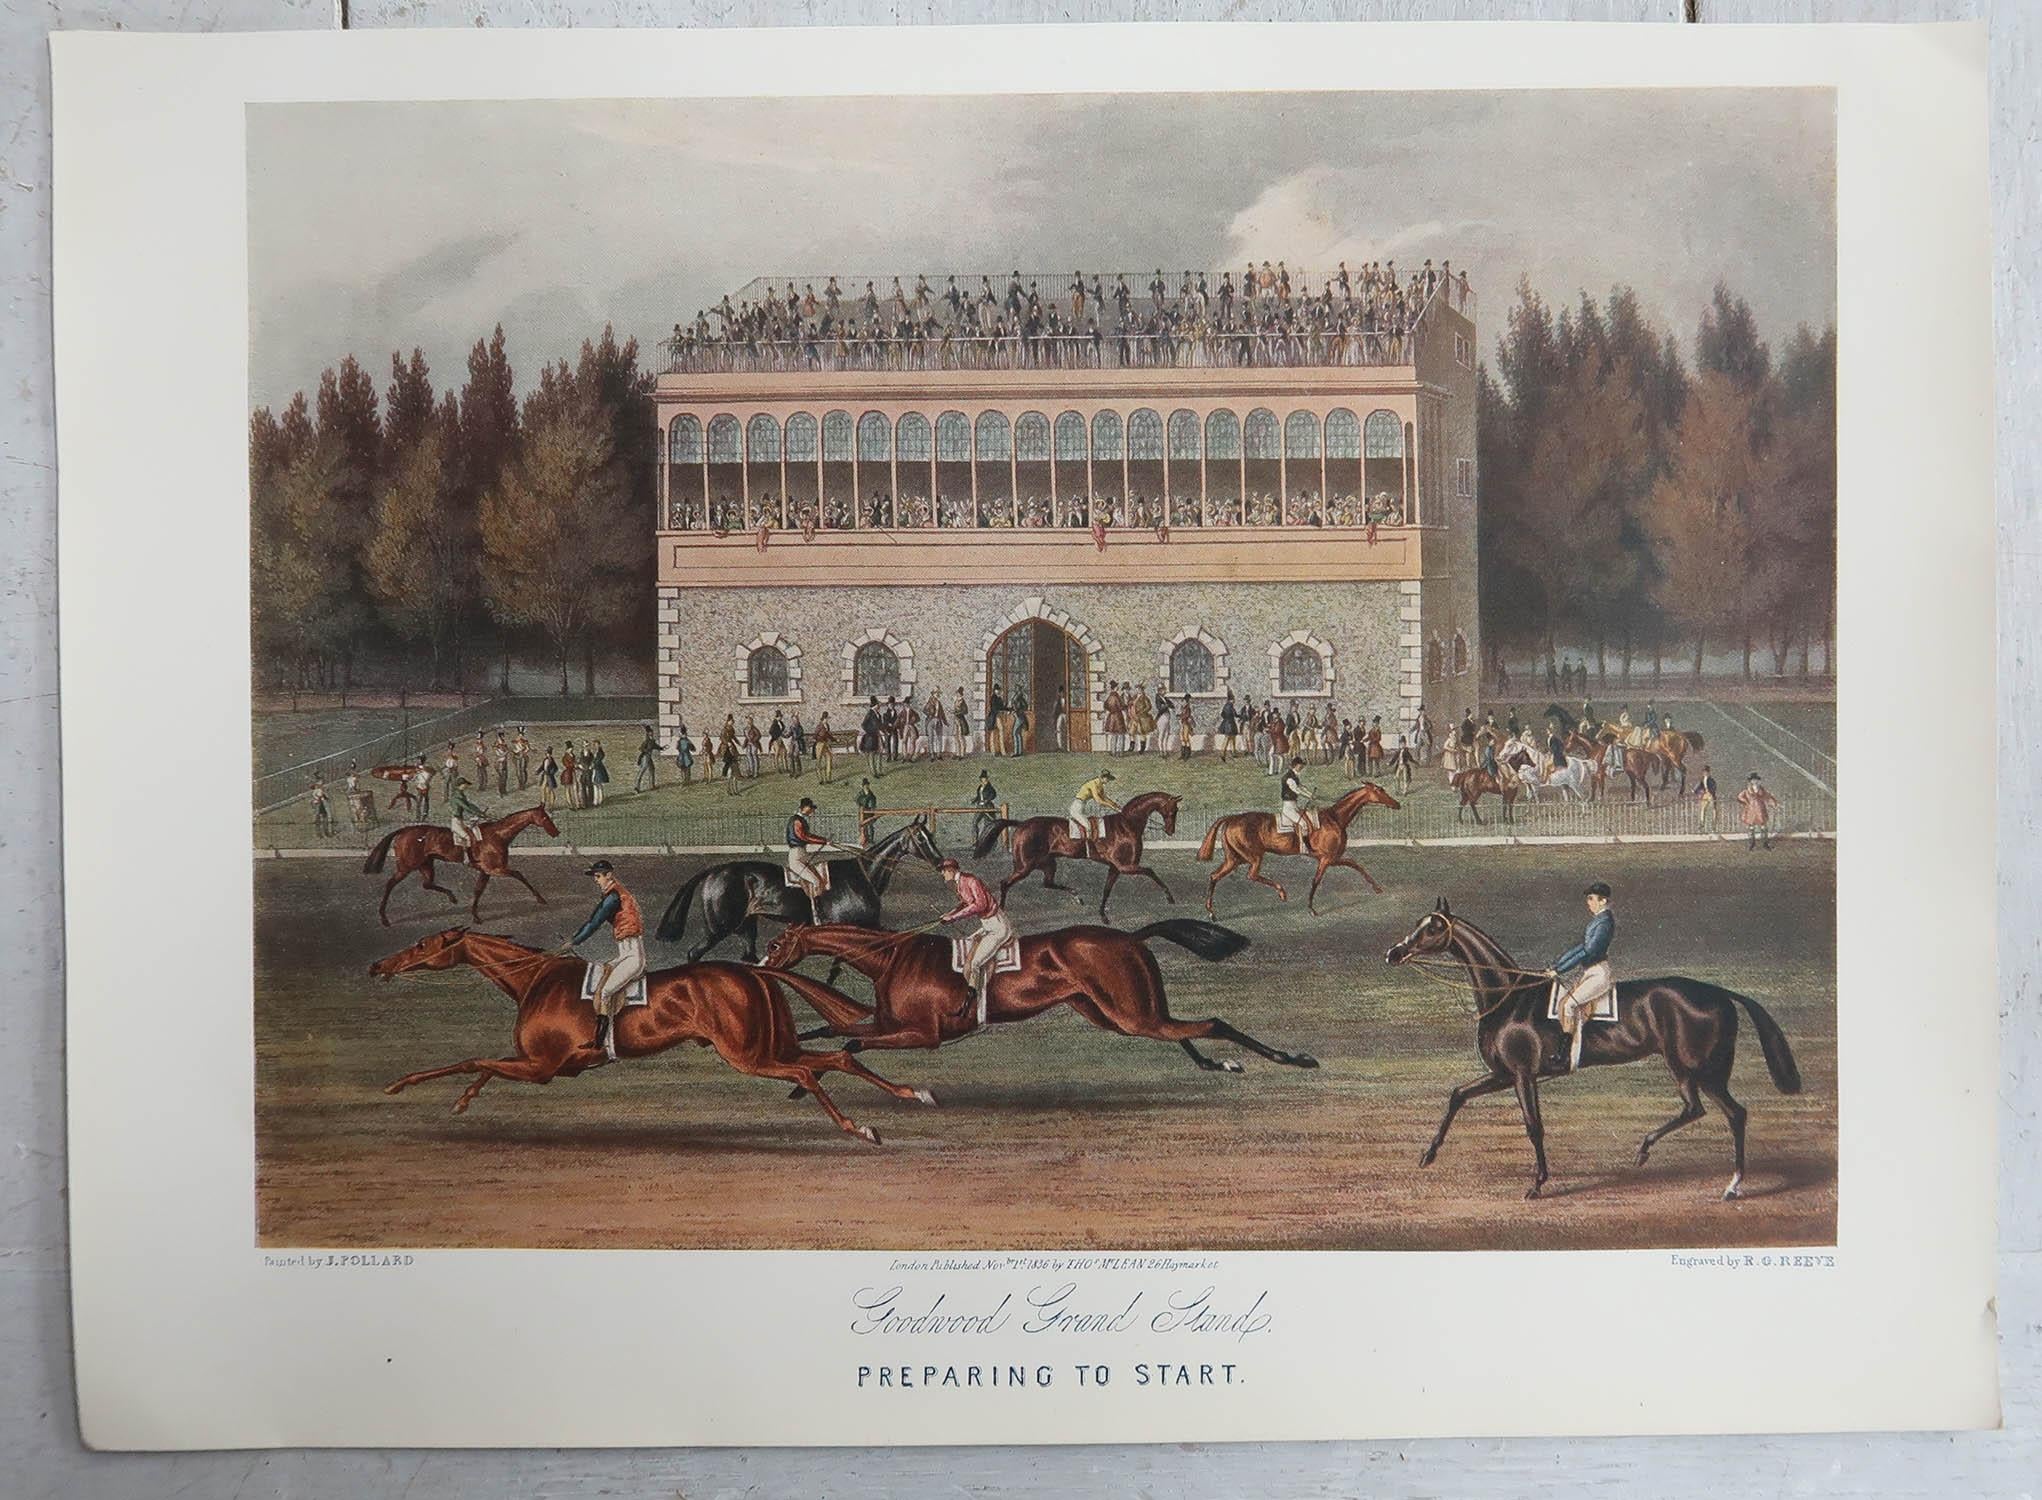 Wonderful sporting prints - horse racing
Lovely colors.
Chromolithographs
Published by Connoisseur, circa 1900
Unframed.